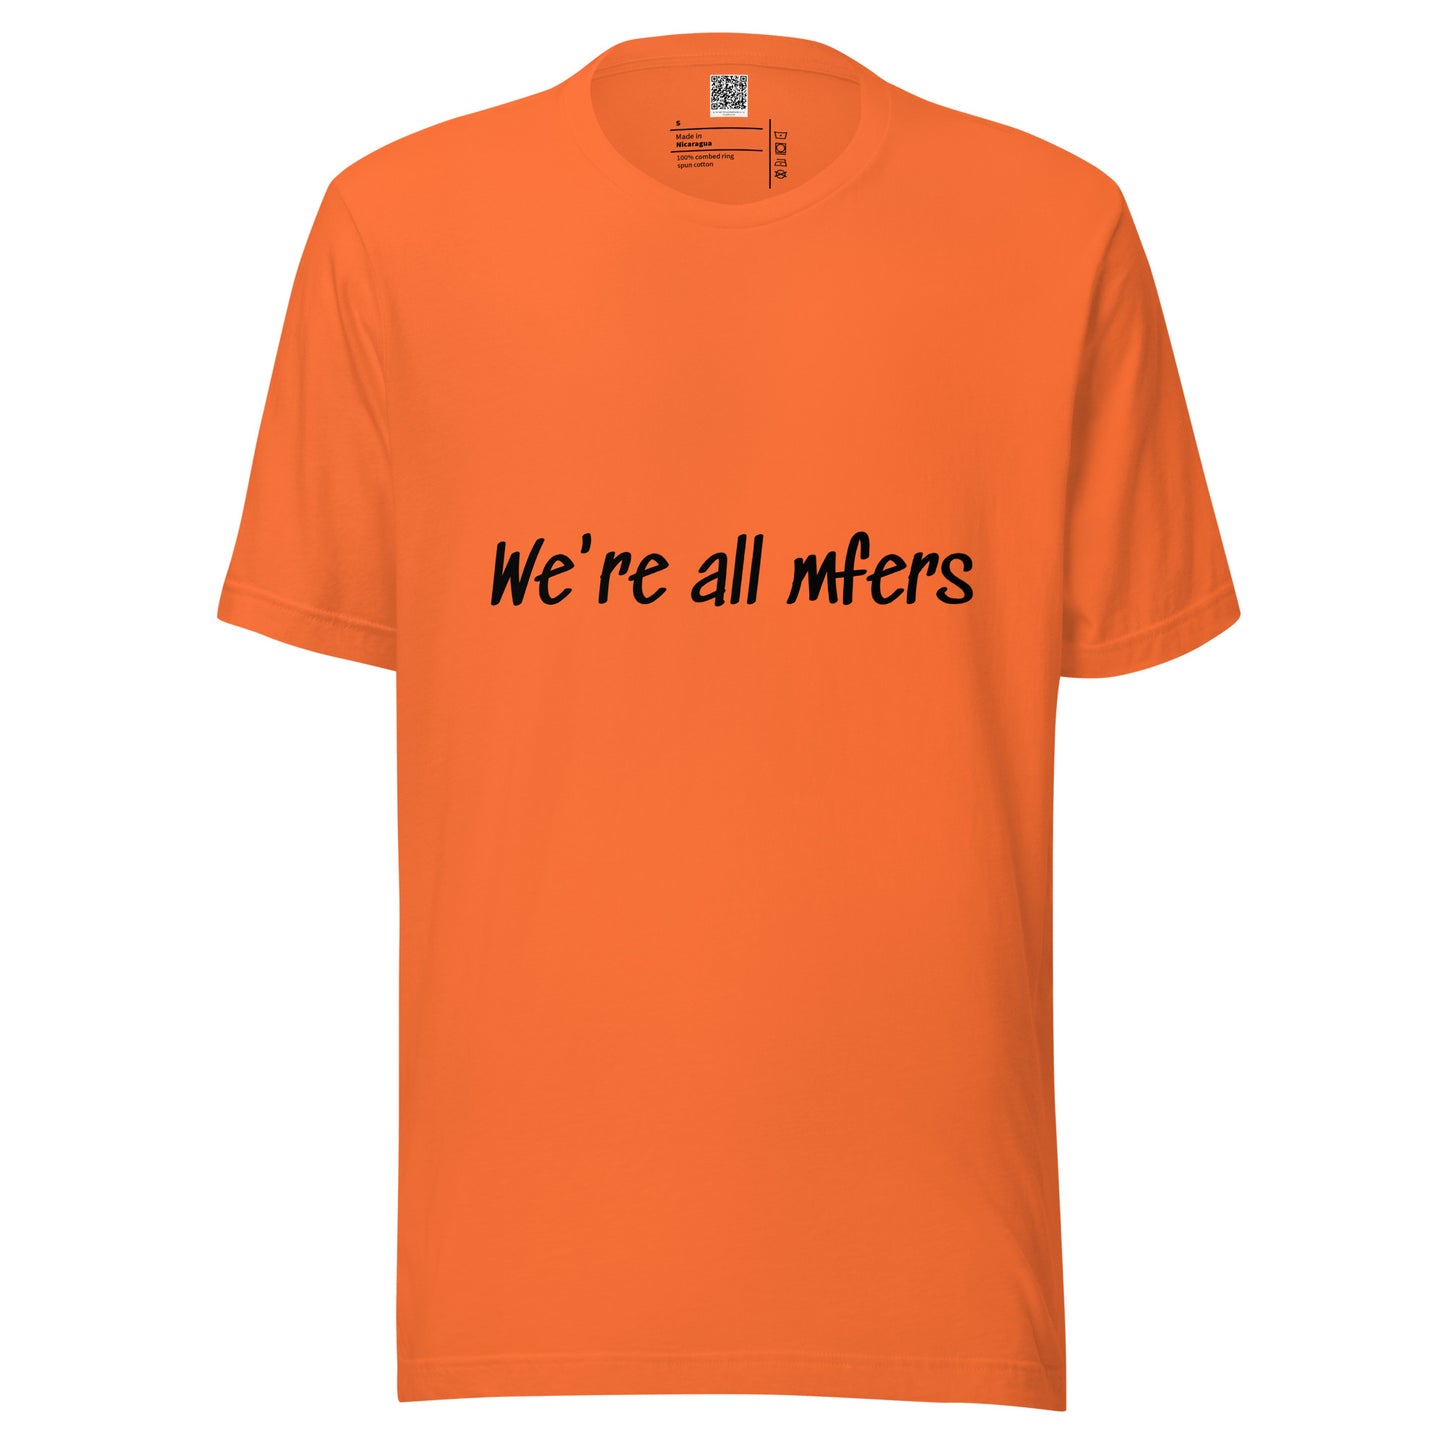 Unisex t-shirt - We're all mfers